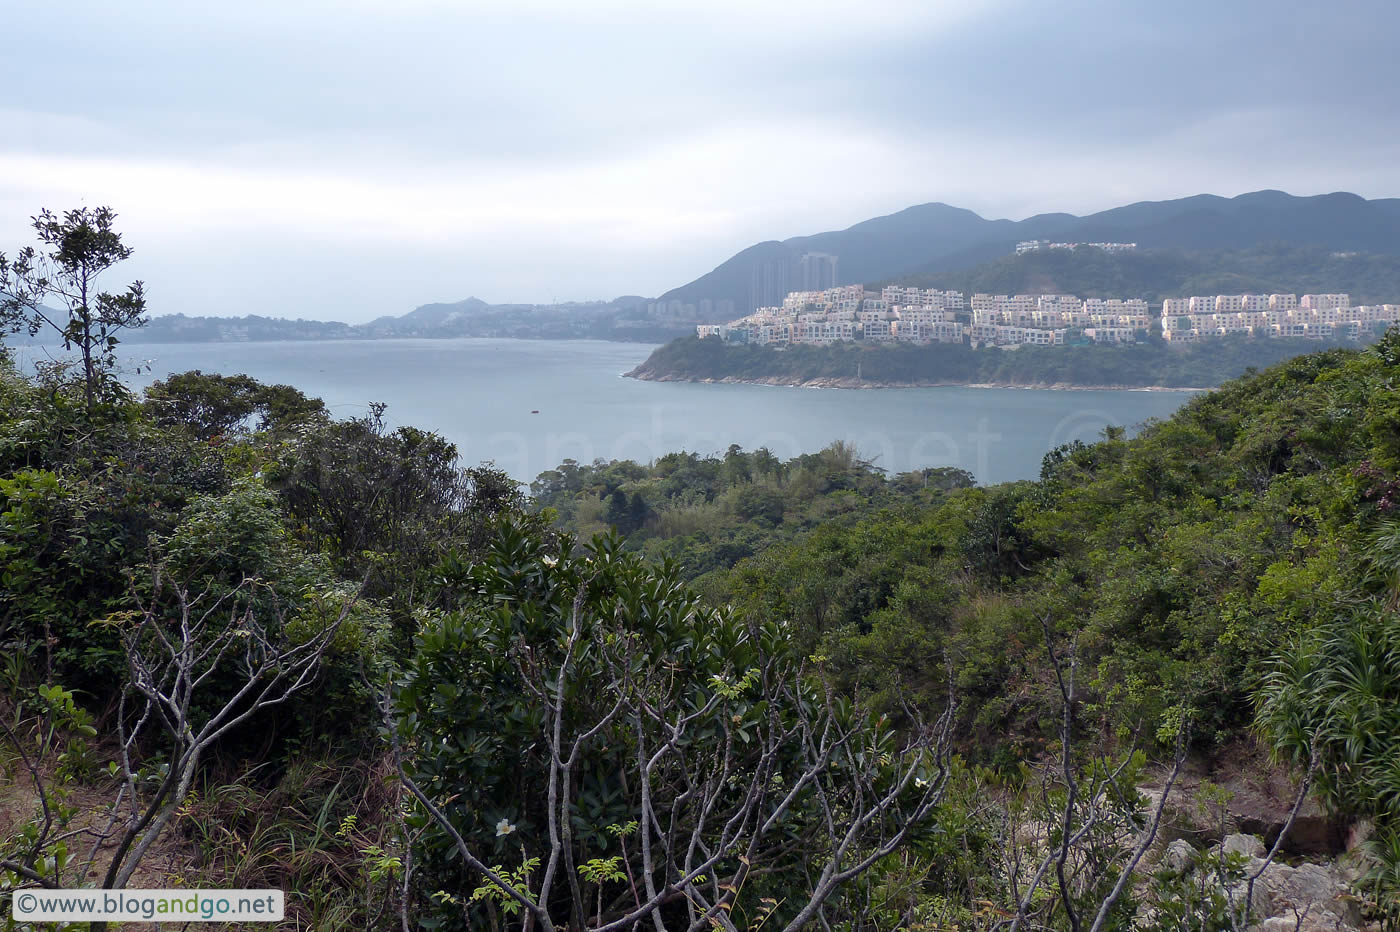 Hong Kong Trail 7 - Red Hill and Stanley from around H83